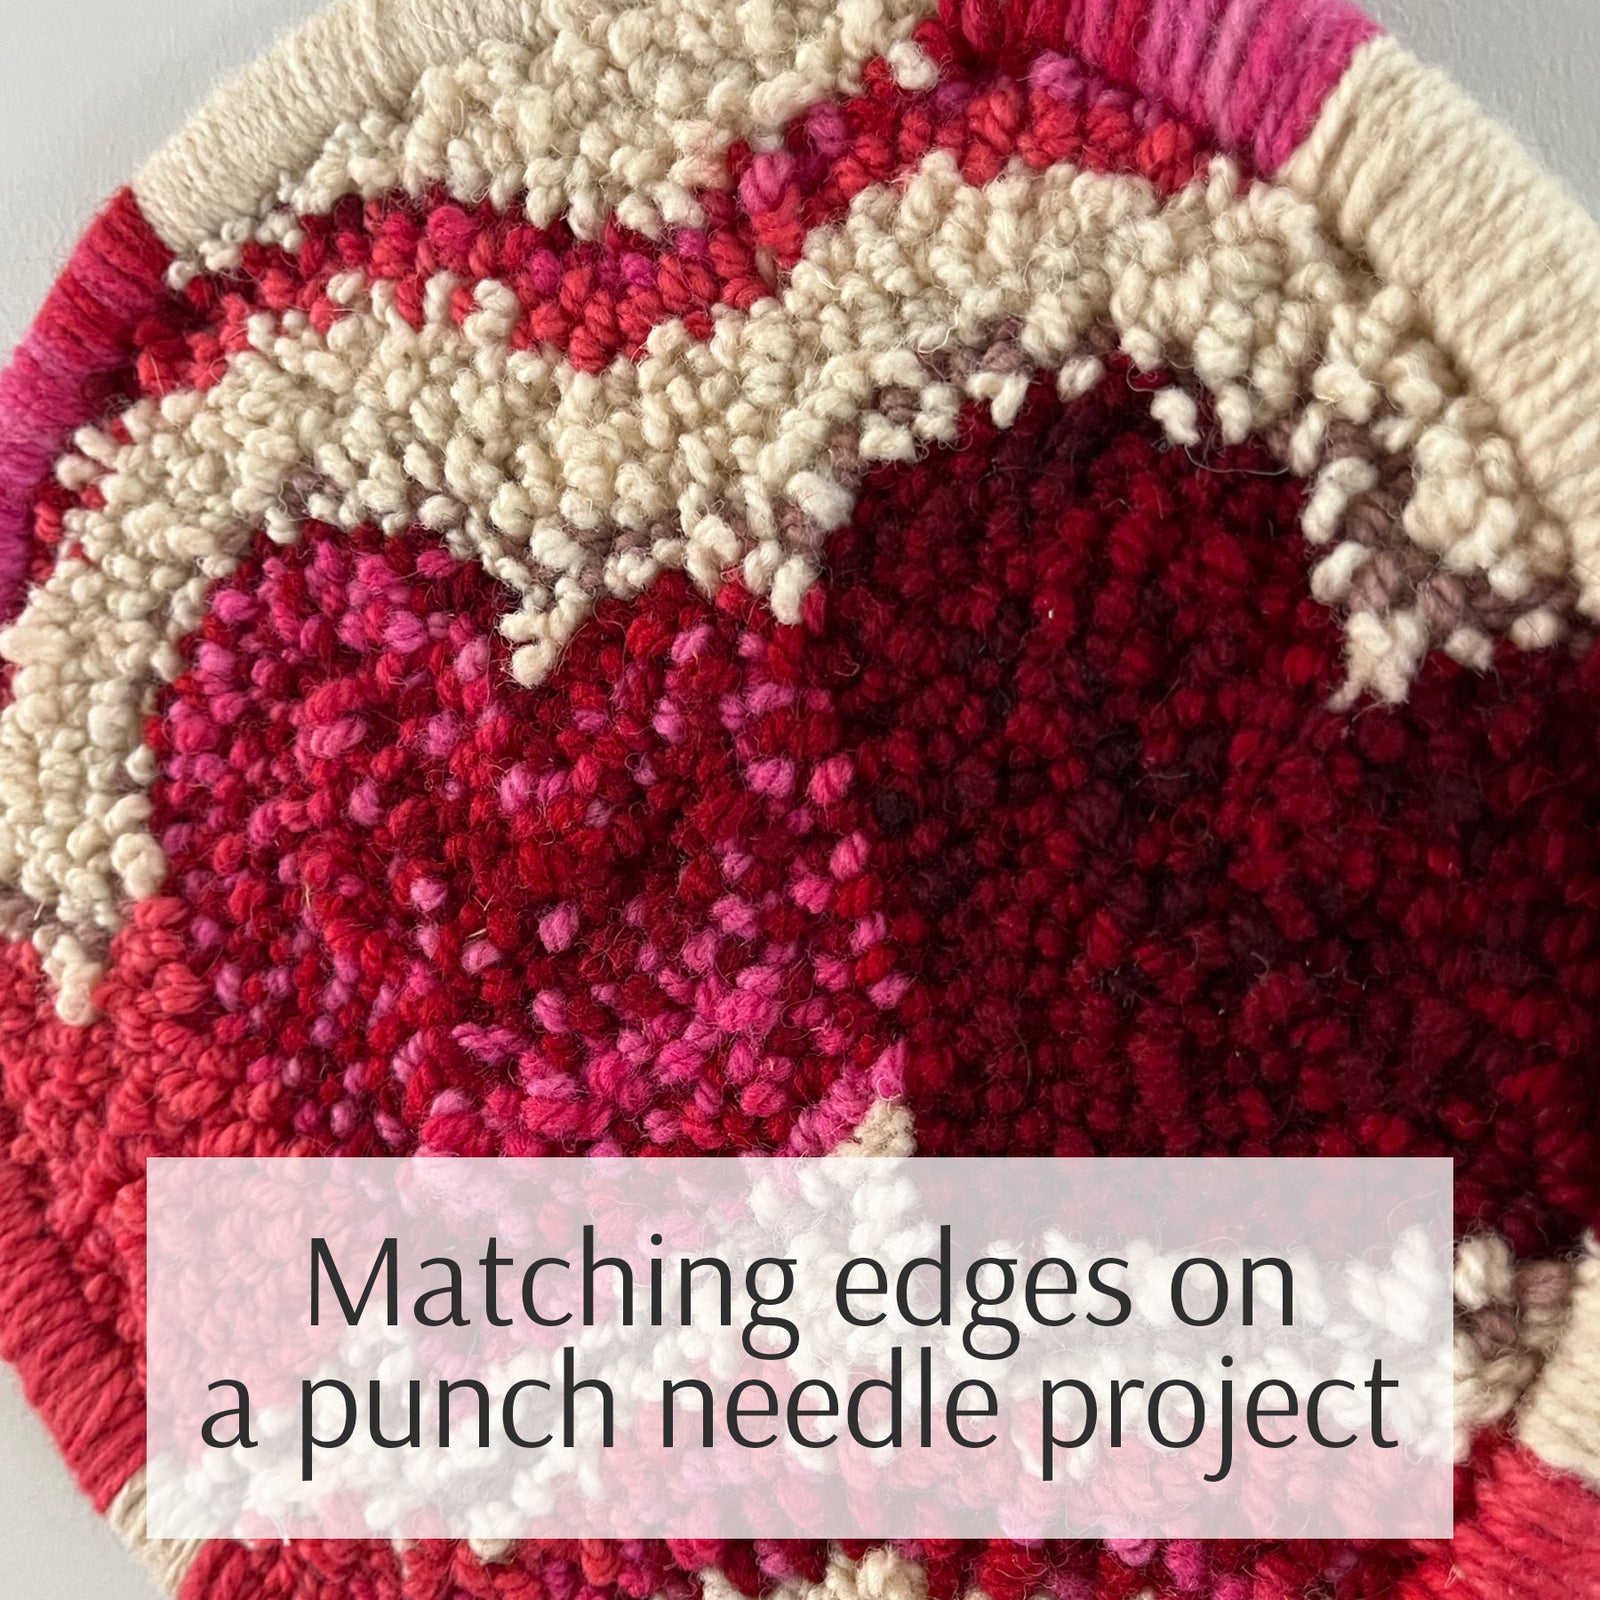 Foundation Cloth, Yarn and Punch Needle Pairing – With Autumn